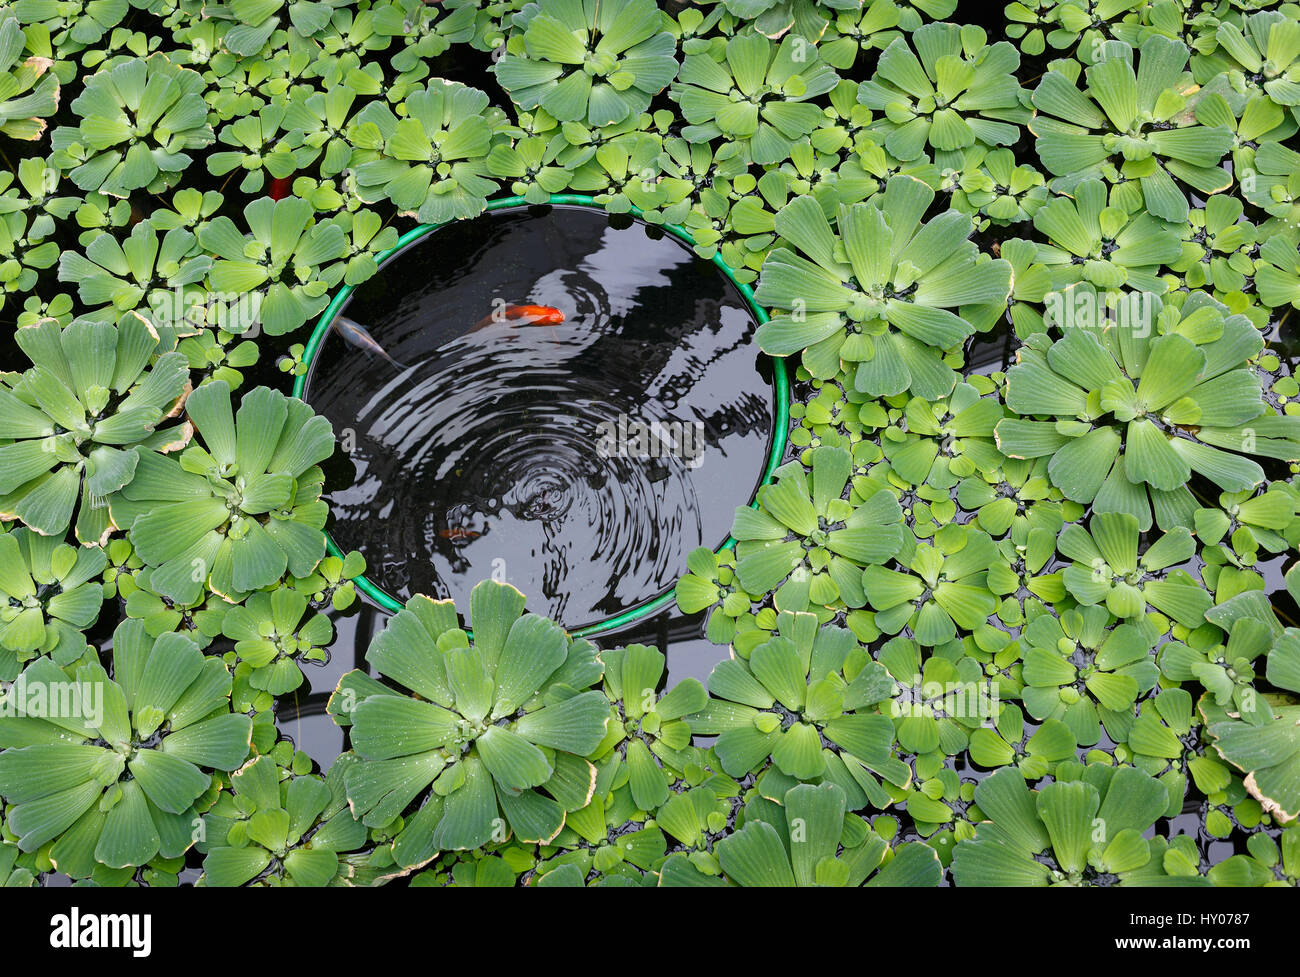 Red carp in a pond that is overgrown with green lettuce Stock Photo